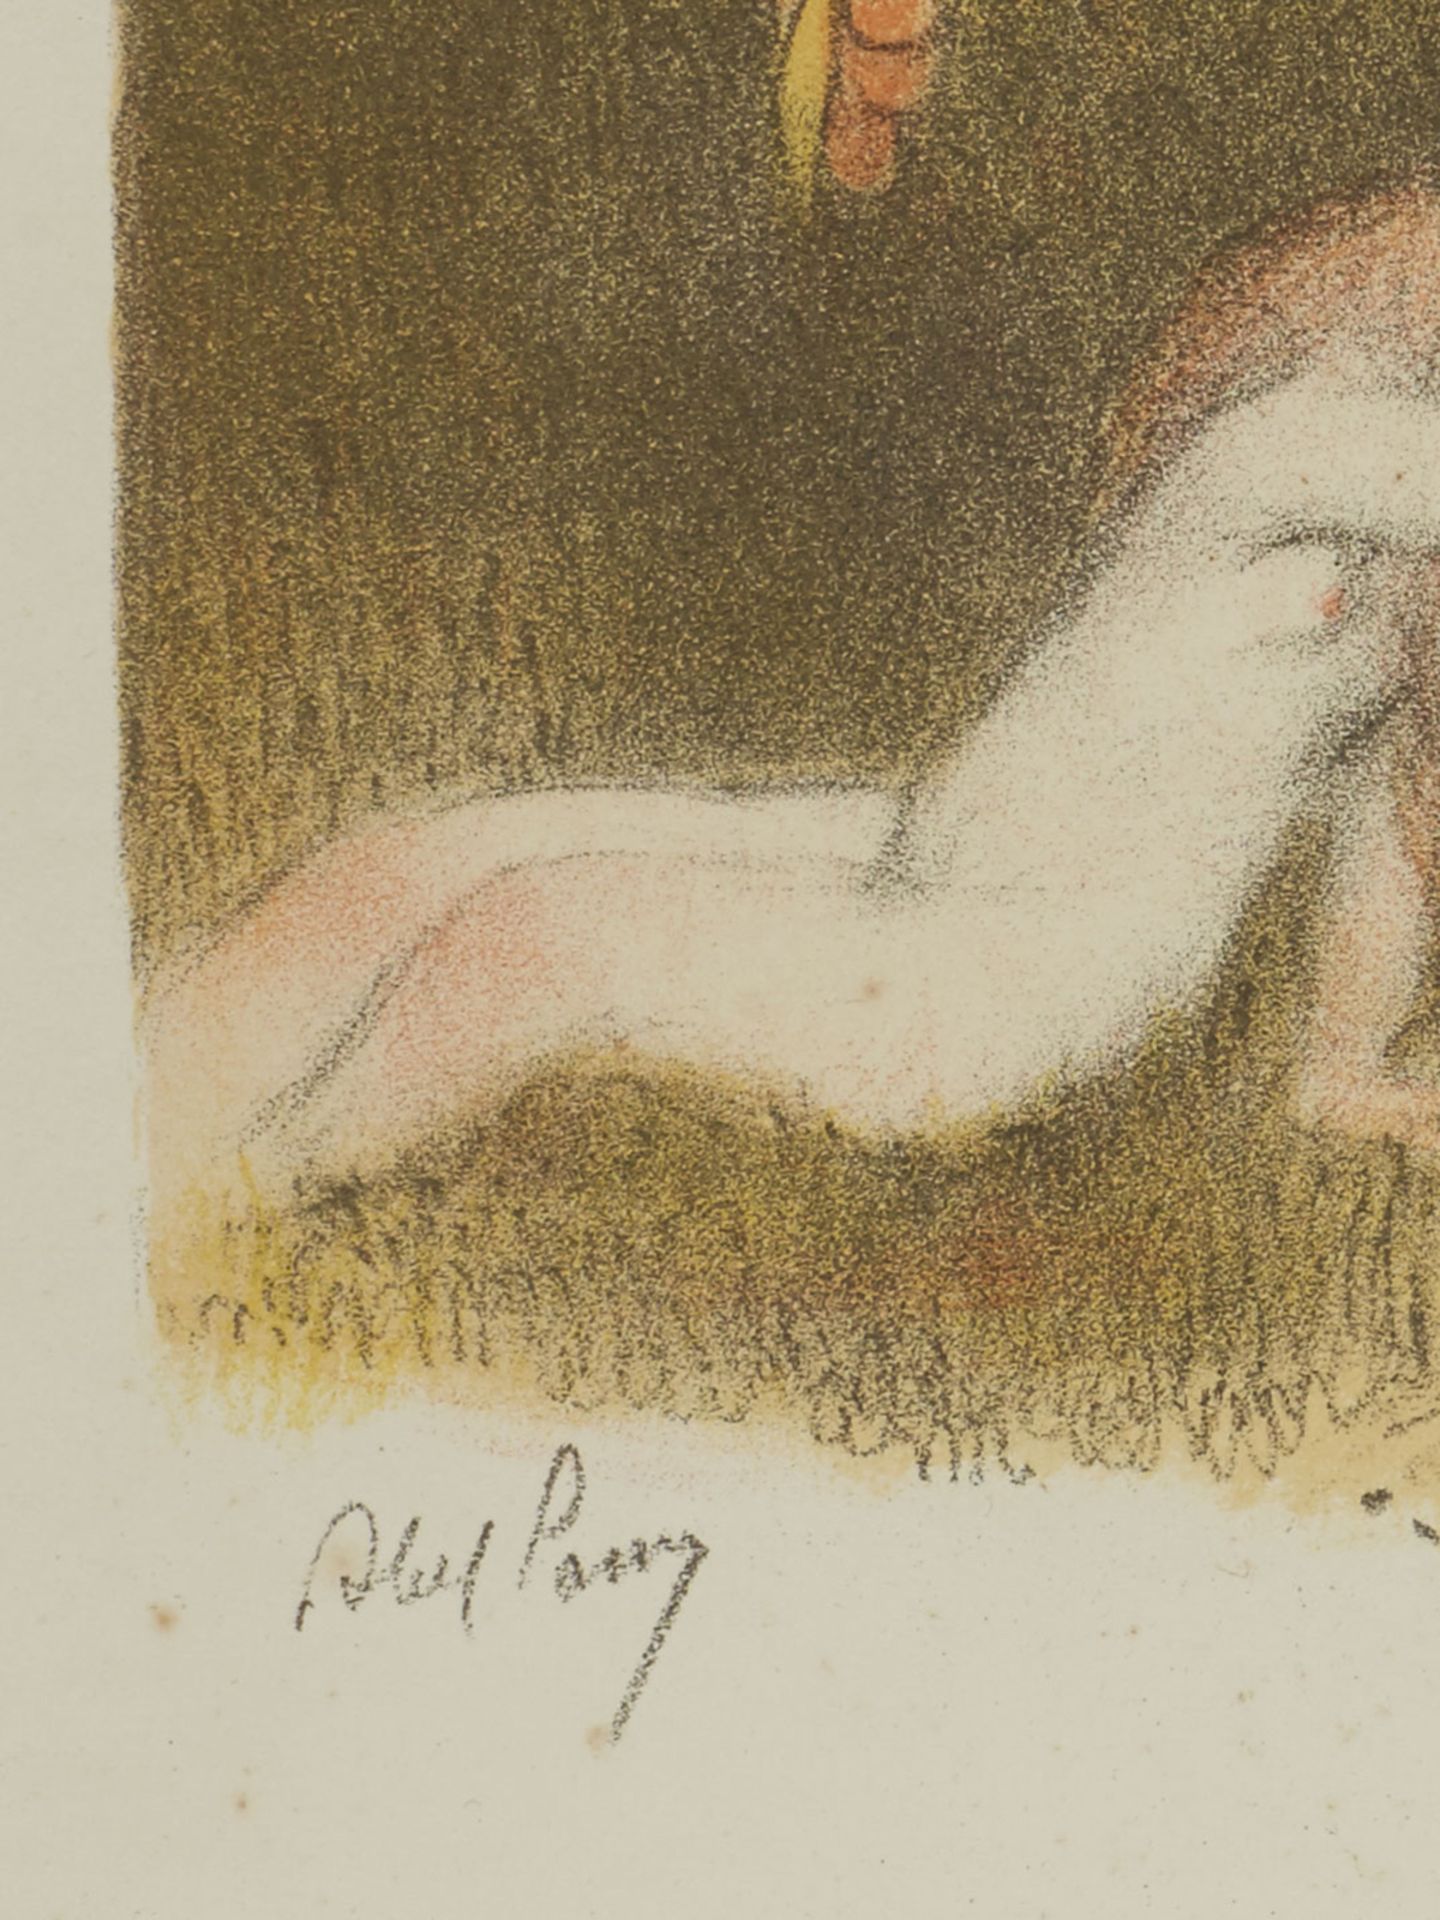 HANDMADE PRINT OF ADAM AND EVE, SIGNED PARRY, 20TH C. - Image 3 of 7